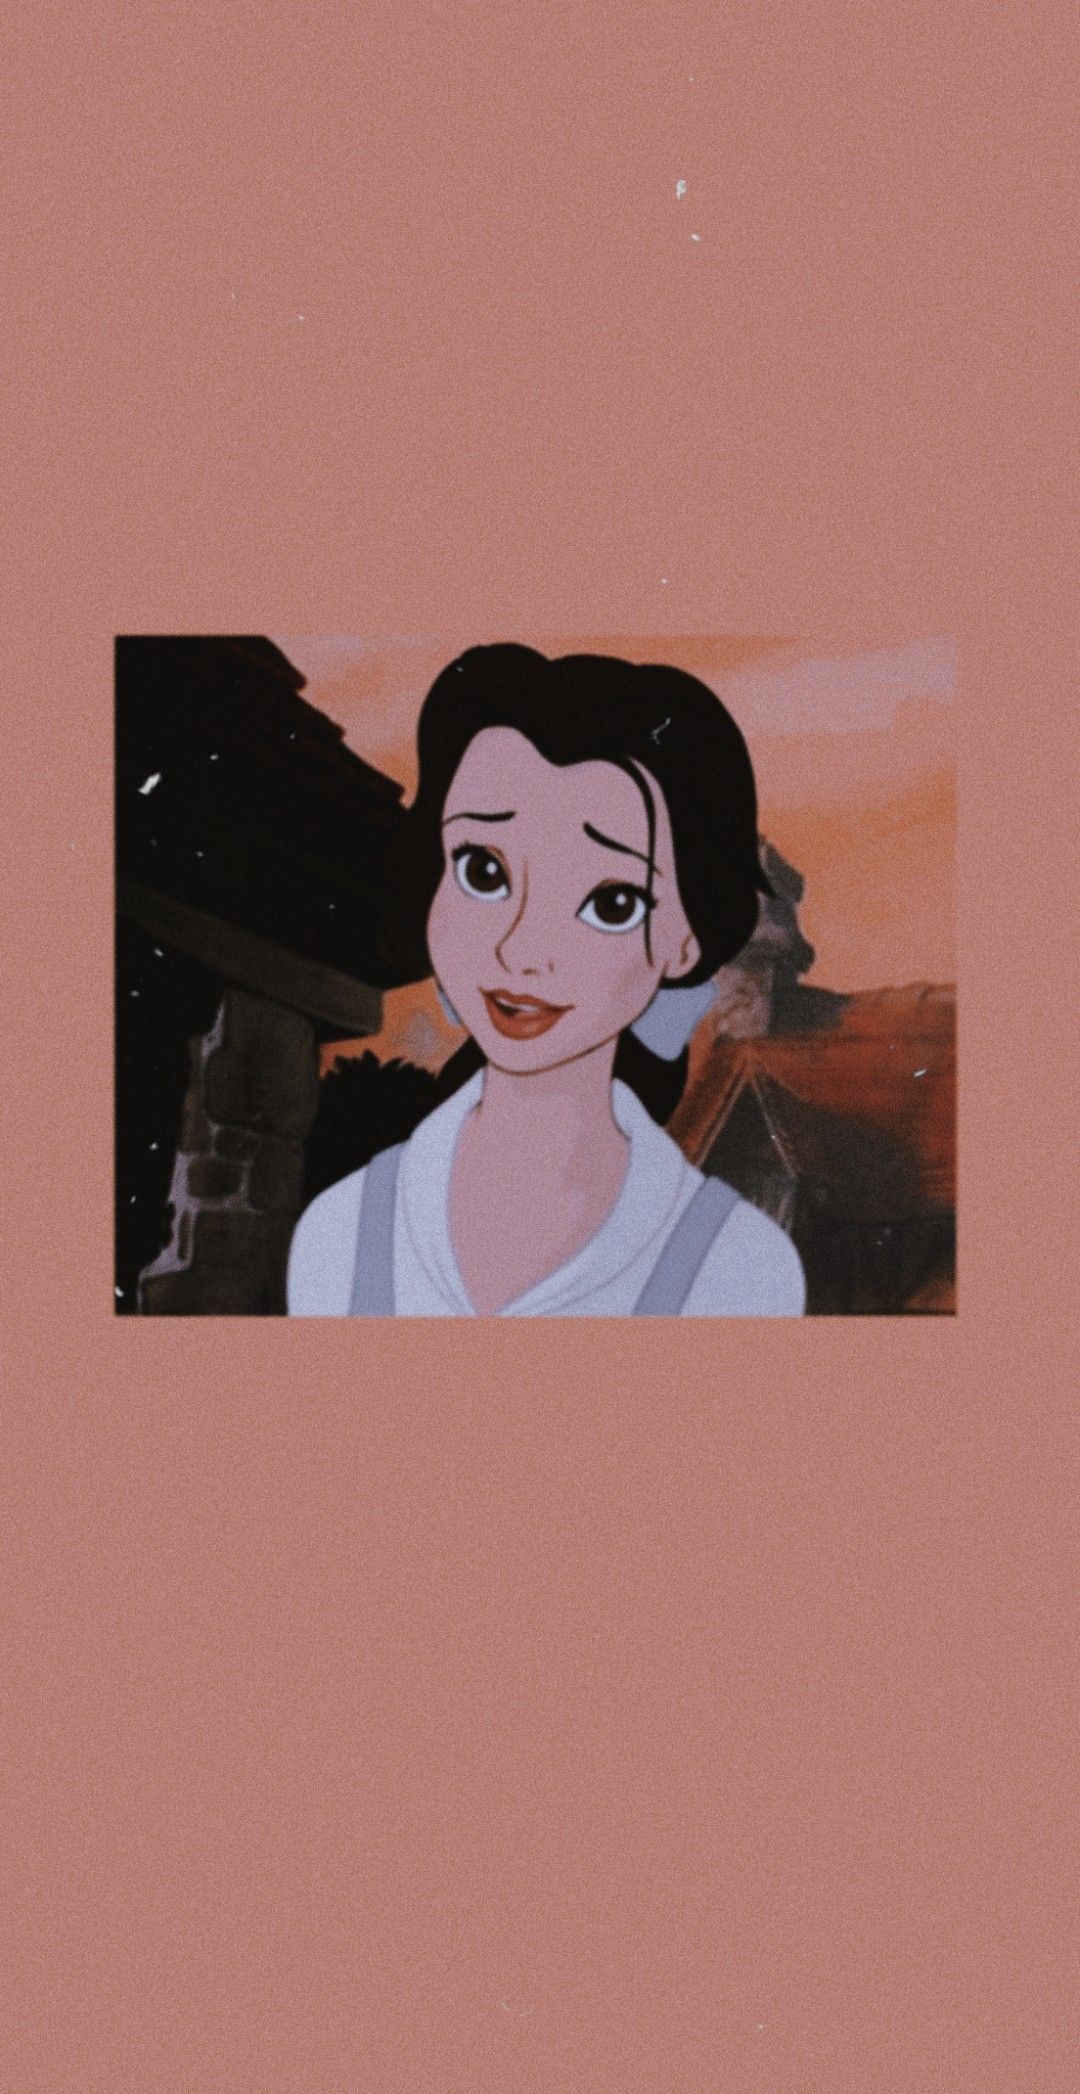 beauty and the beast // belle aesthetic wallpaper. Disney characters wallpaper, Disney wallpaper, Cartoon wallpaper iphone